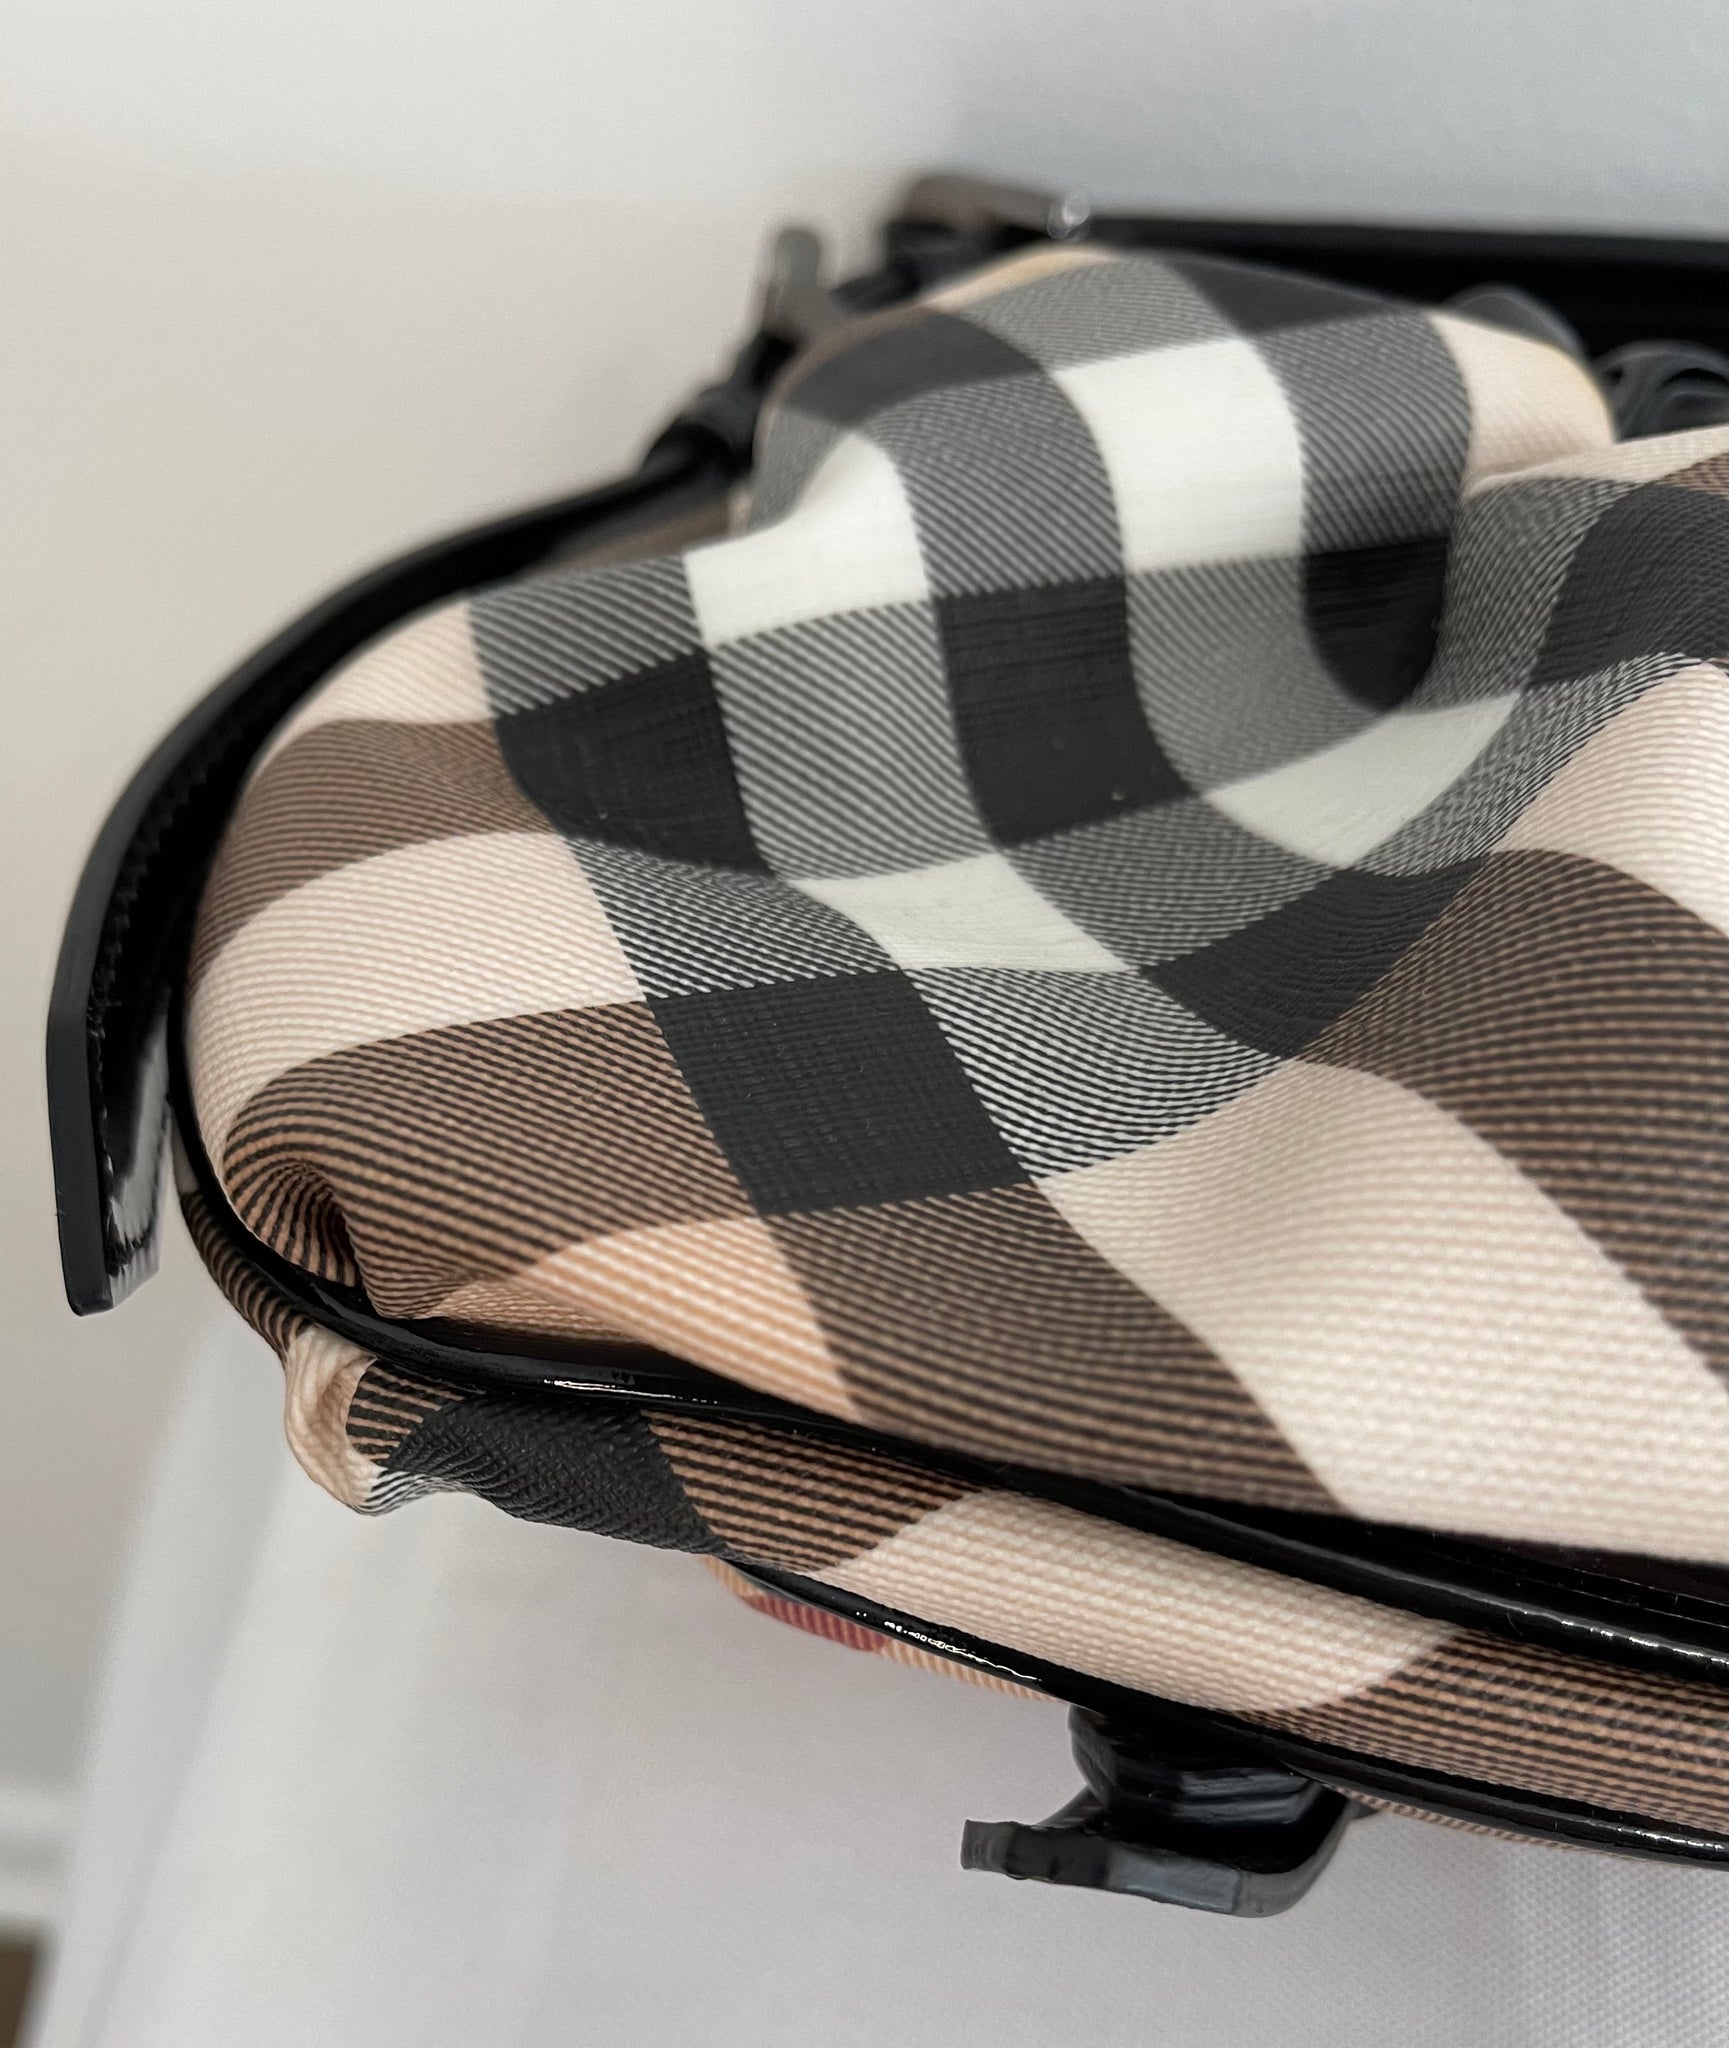 Burberry Nova Check Patent Leather Sling Bag – Midtown Authentic Wyckoff